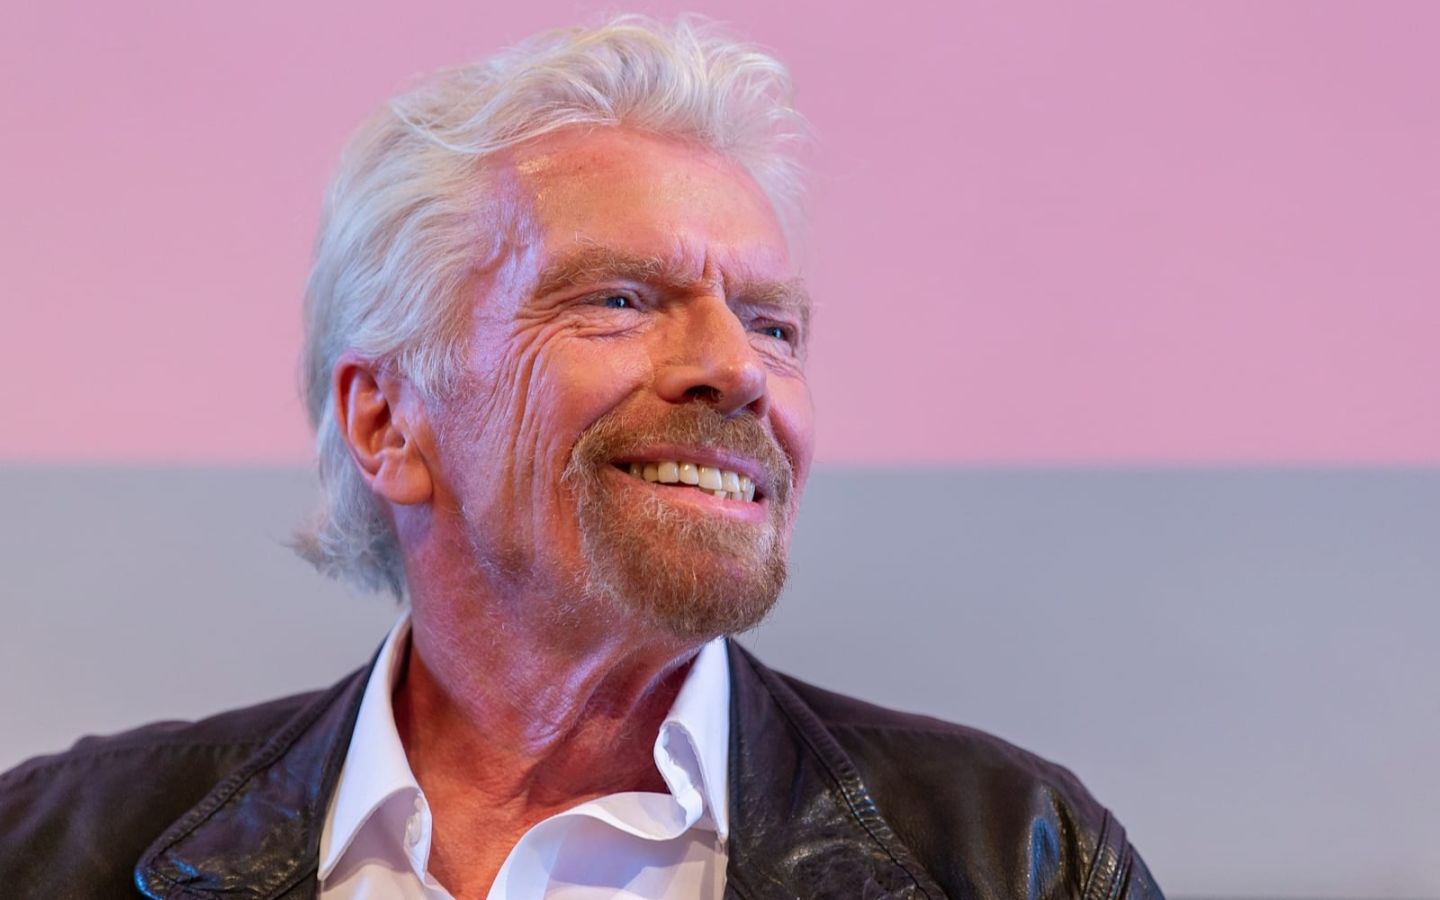 Richard Branson close up, he's looking away from the camera